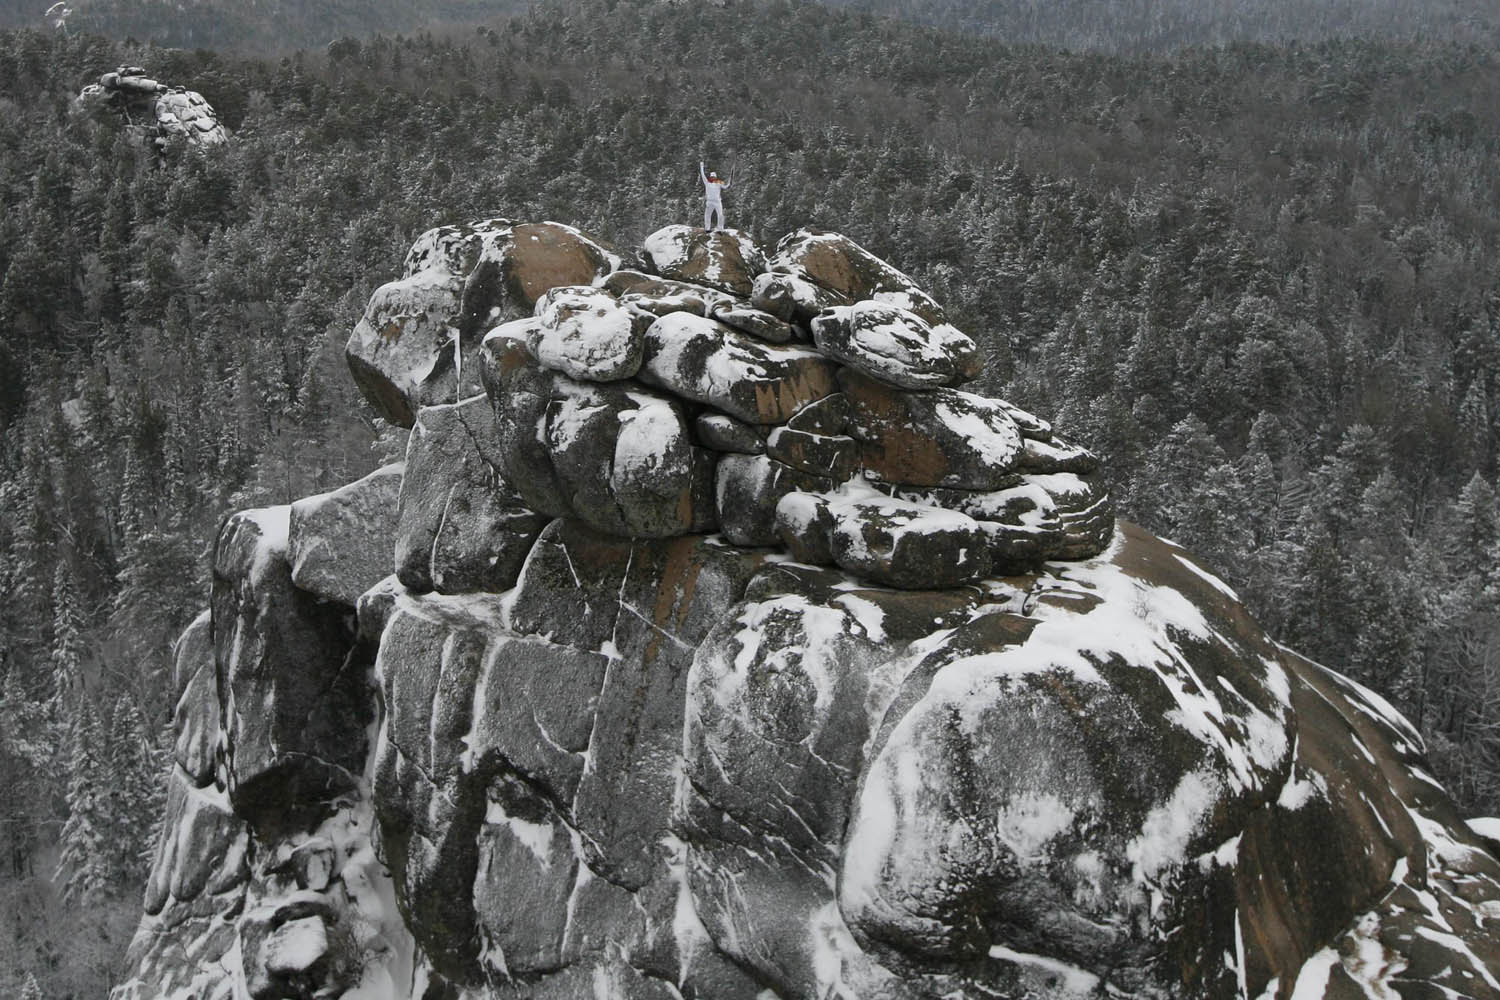 Russian alpinist Vladimir Gunko stands at the top of the rock named "The First Stolb" (the First Pillar) outside Krasnoyarsk